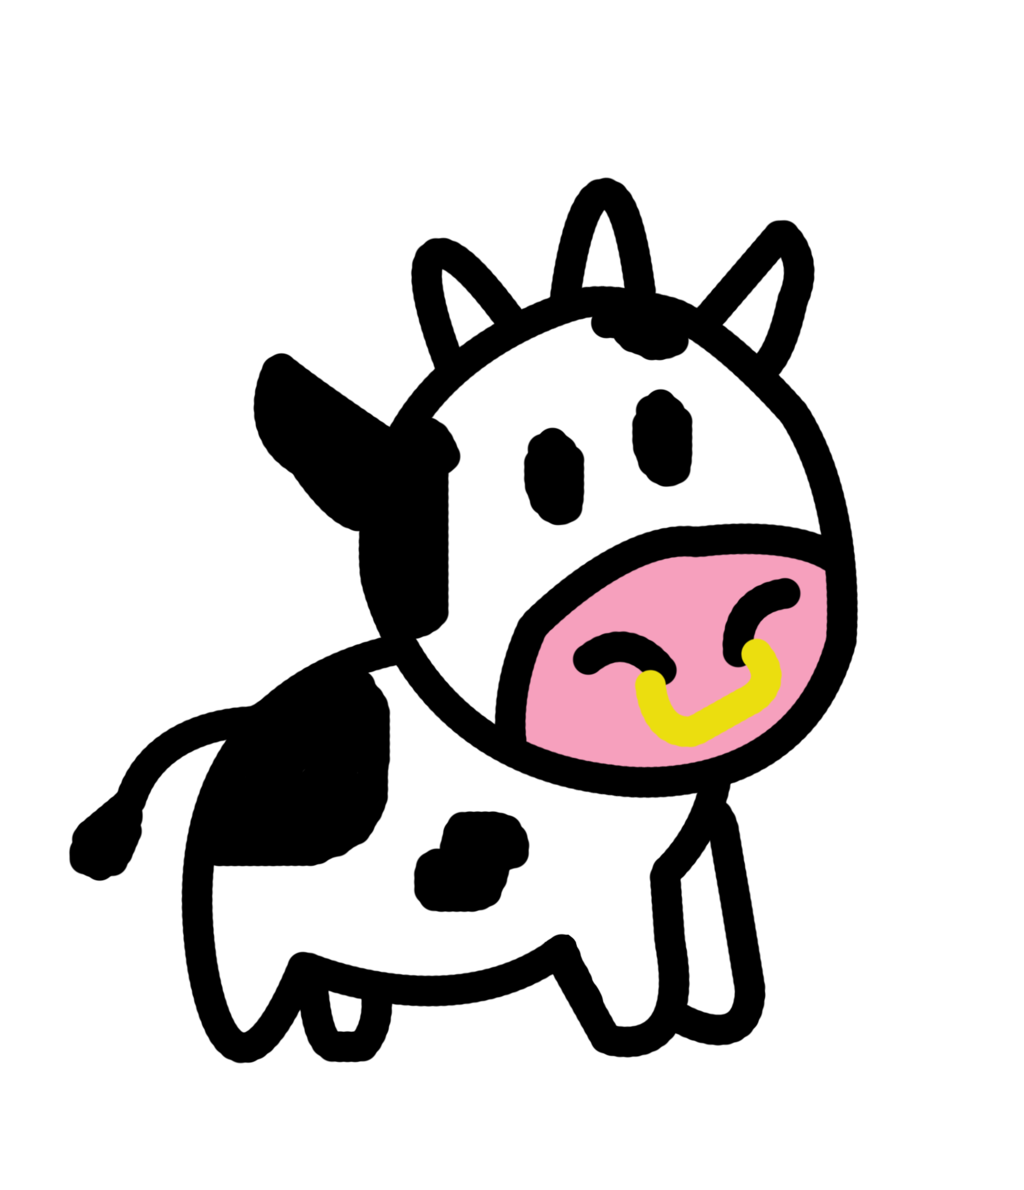 Free Cartoon Cow Image, Download Free Clip Art, Free Clip Art on Clipart Library